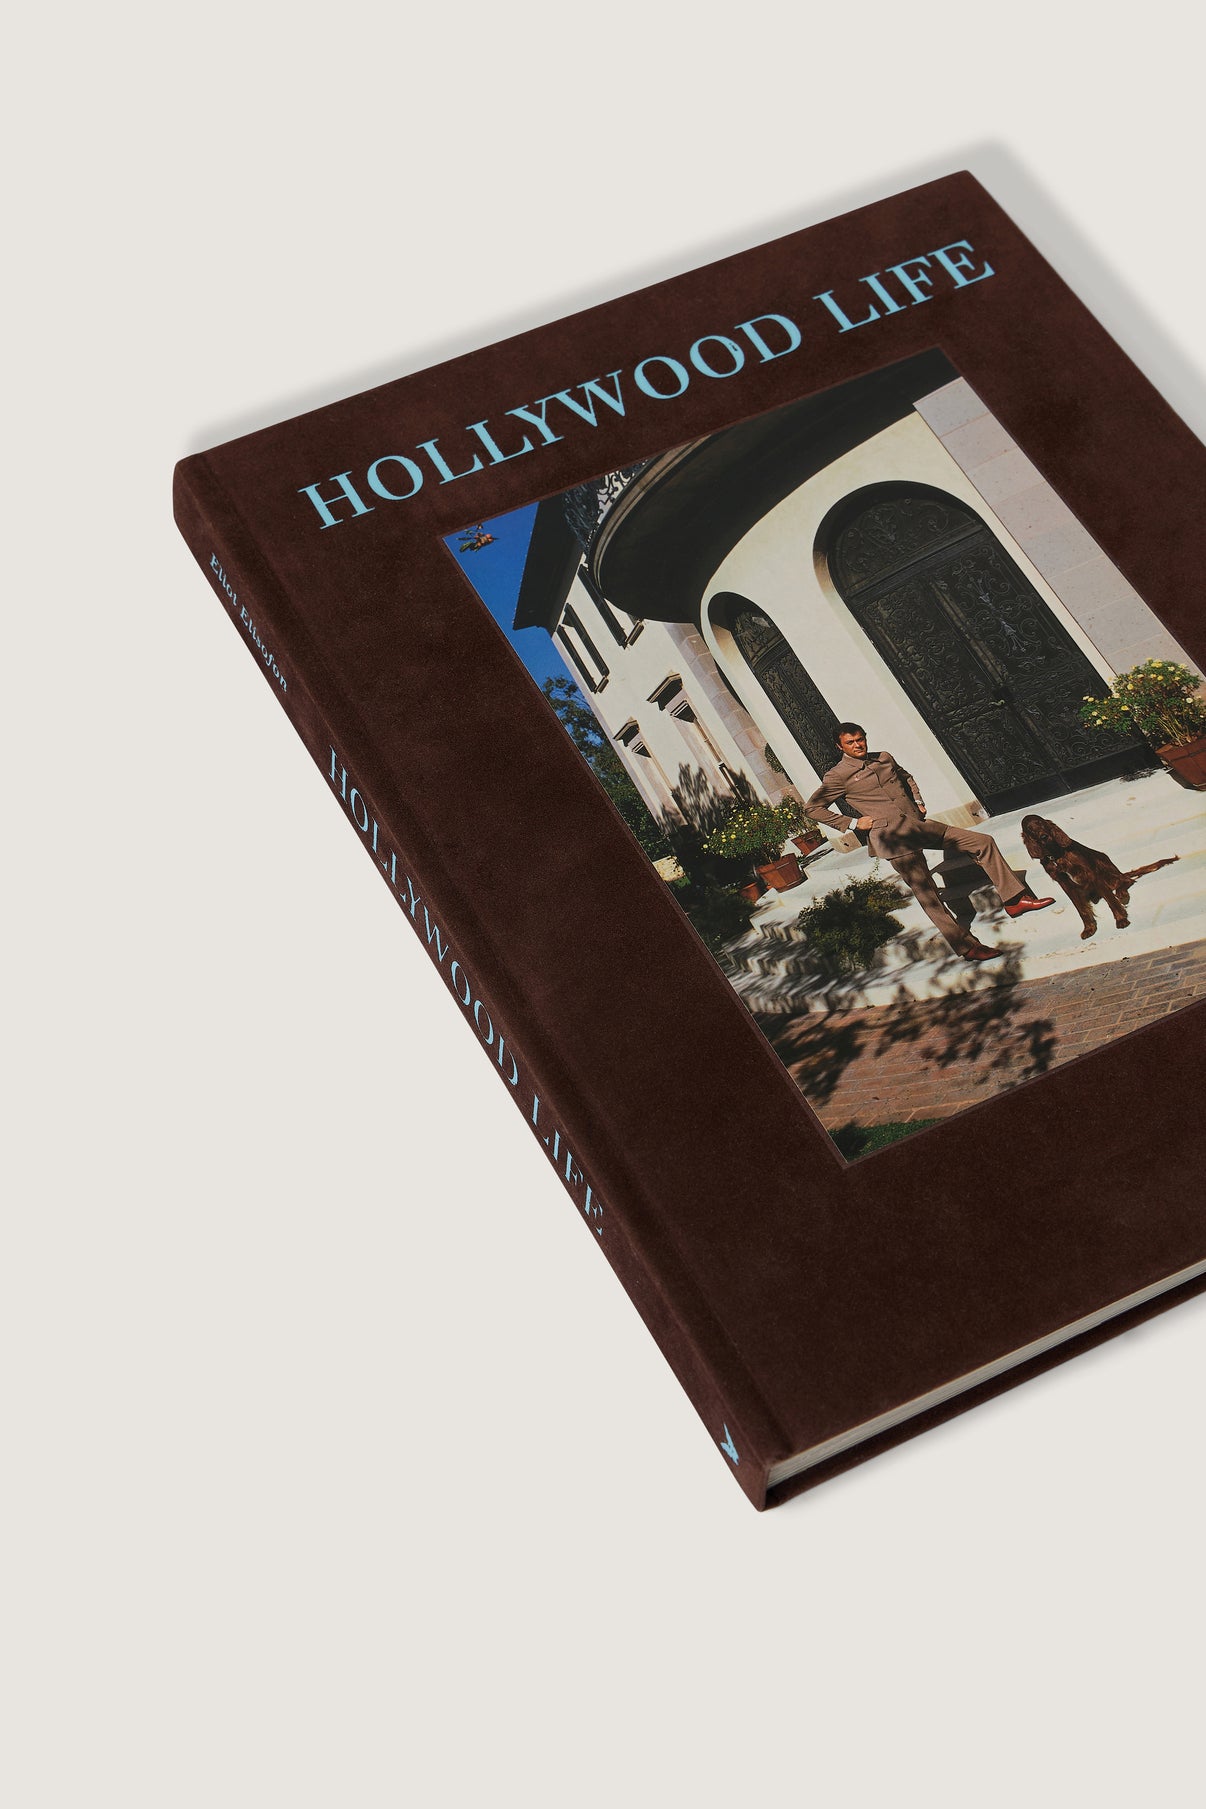 BOOK "HOLLYWOOD LIFE" vue 2